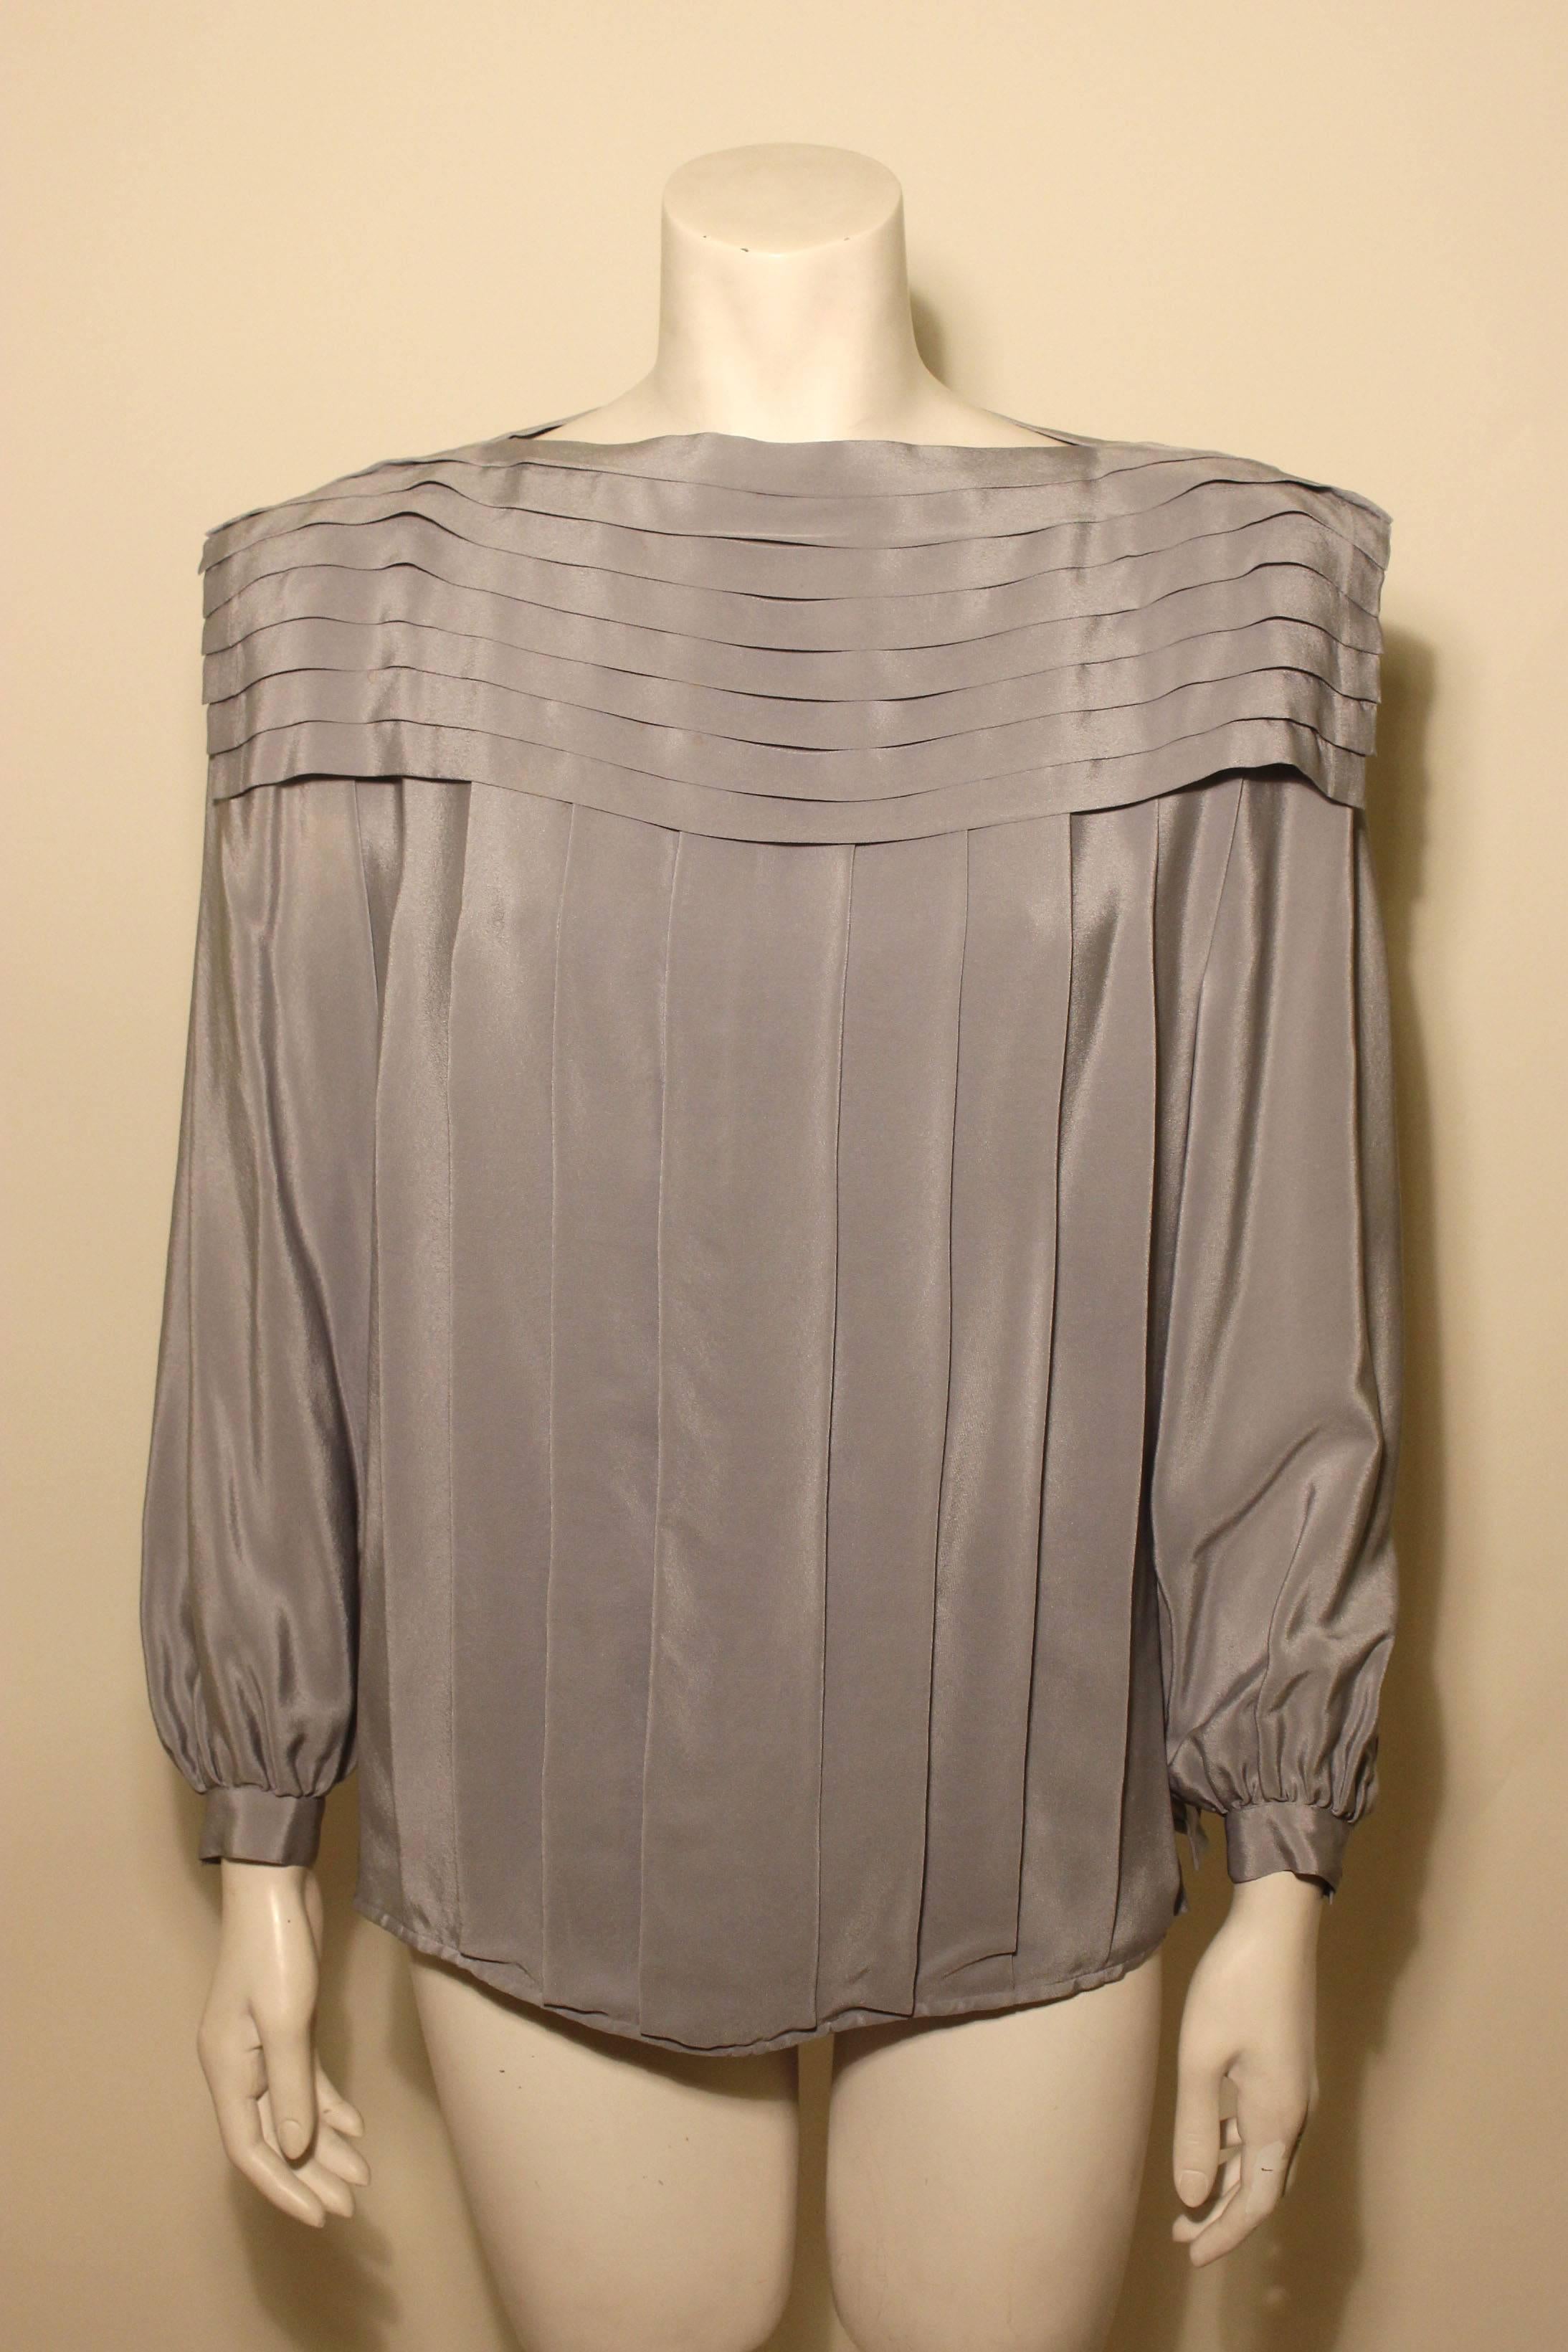 Basile is known for fine fabrics and tailoring. This piece has both elements. This dove grey blouse is made of a fine silk. It drapes beautifully with a yoke of horizontal pleats and a body of vertical ones. 